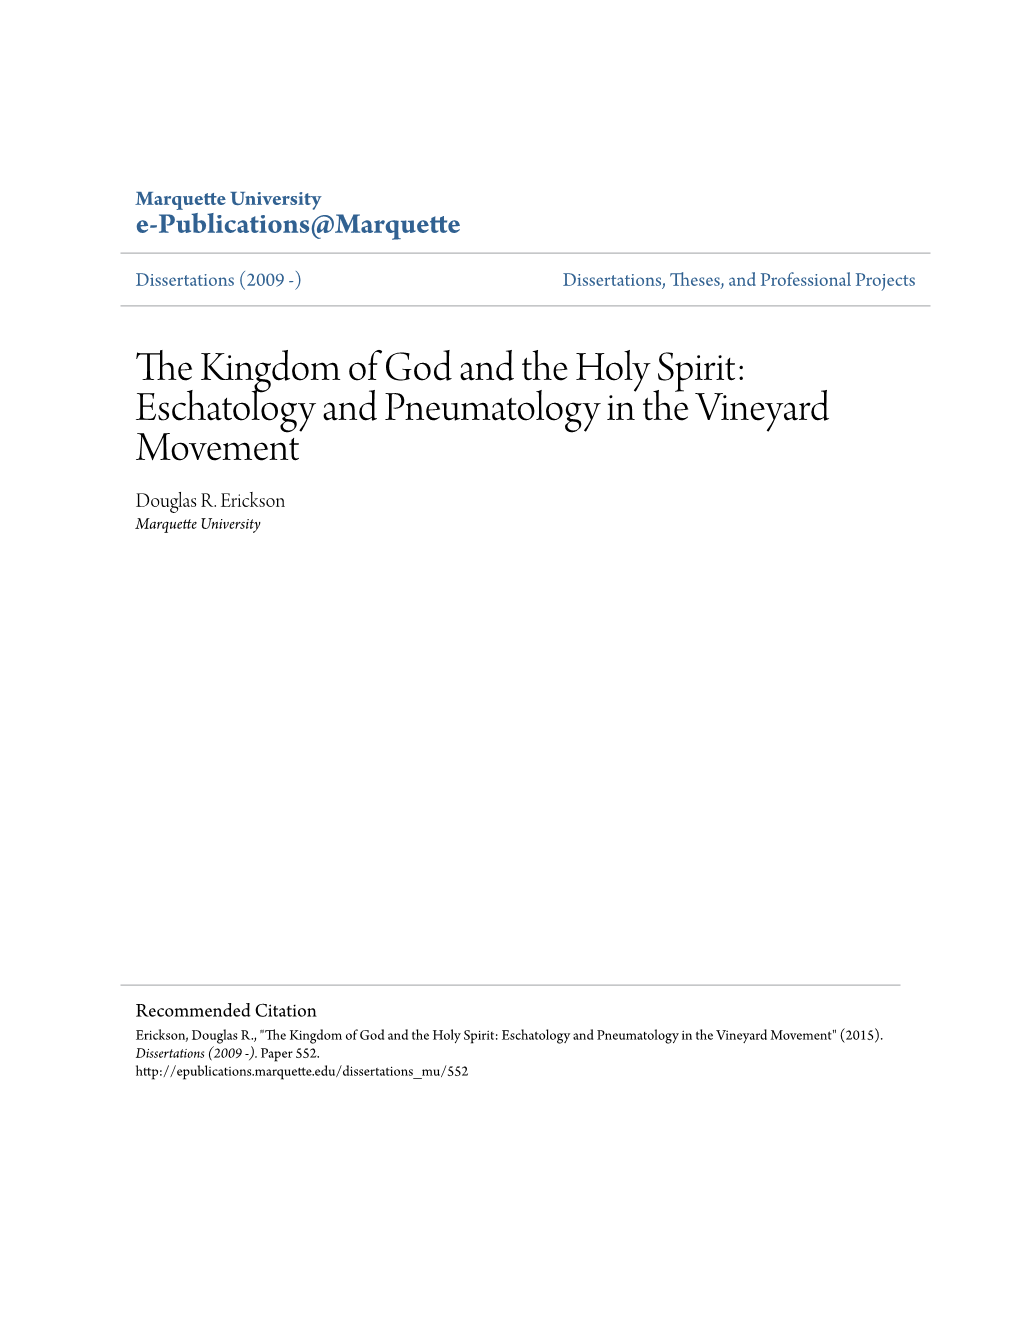 The Kingdom of God and the Holy Spirit: Eschatology and Pneumatology in the Vineyard Movement Douglas R